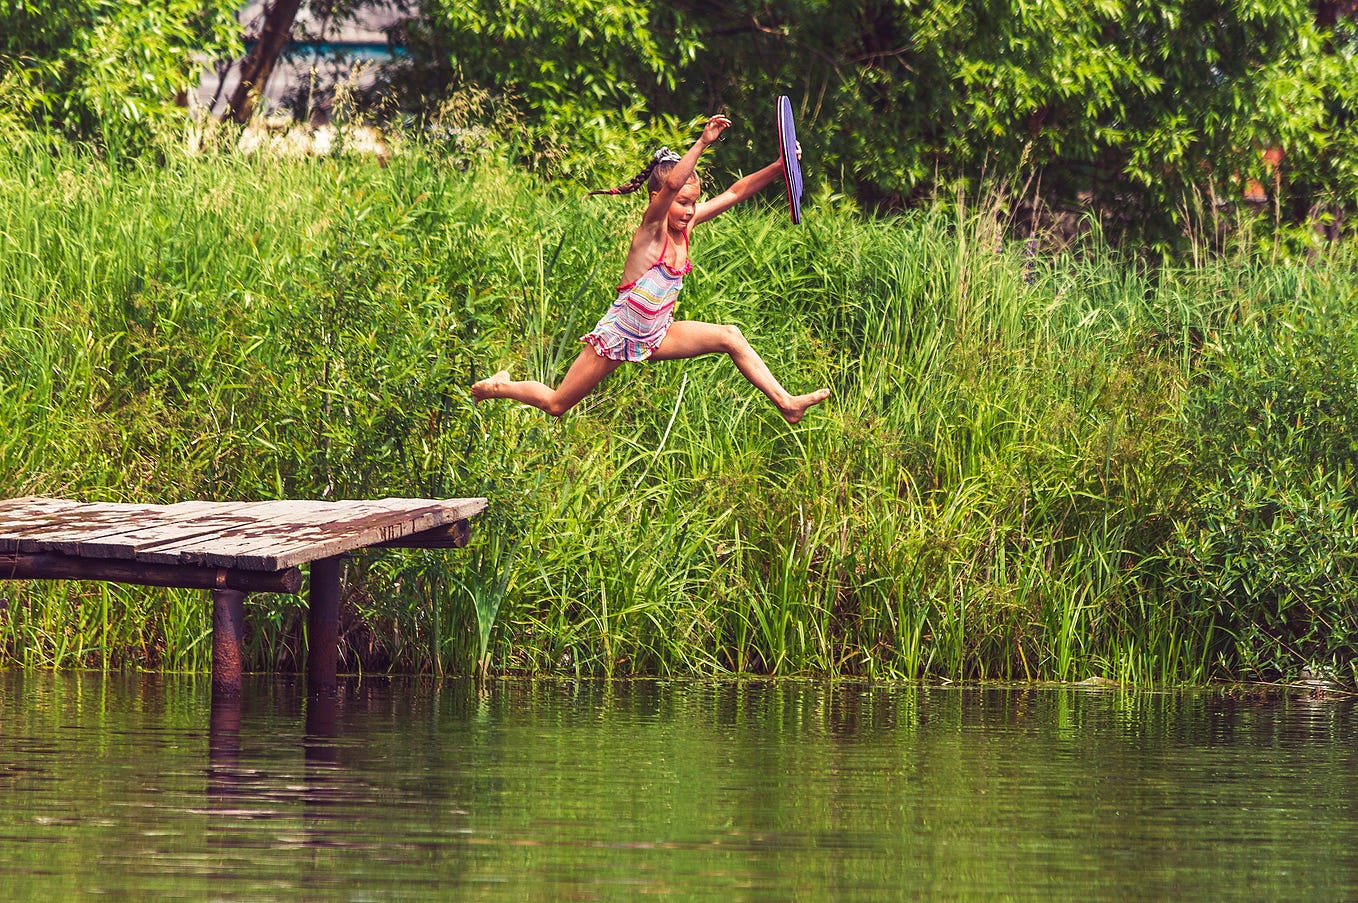 Enjoying summer fun by jumping into the river.